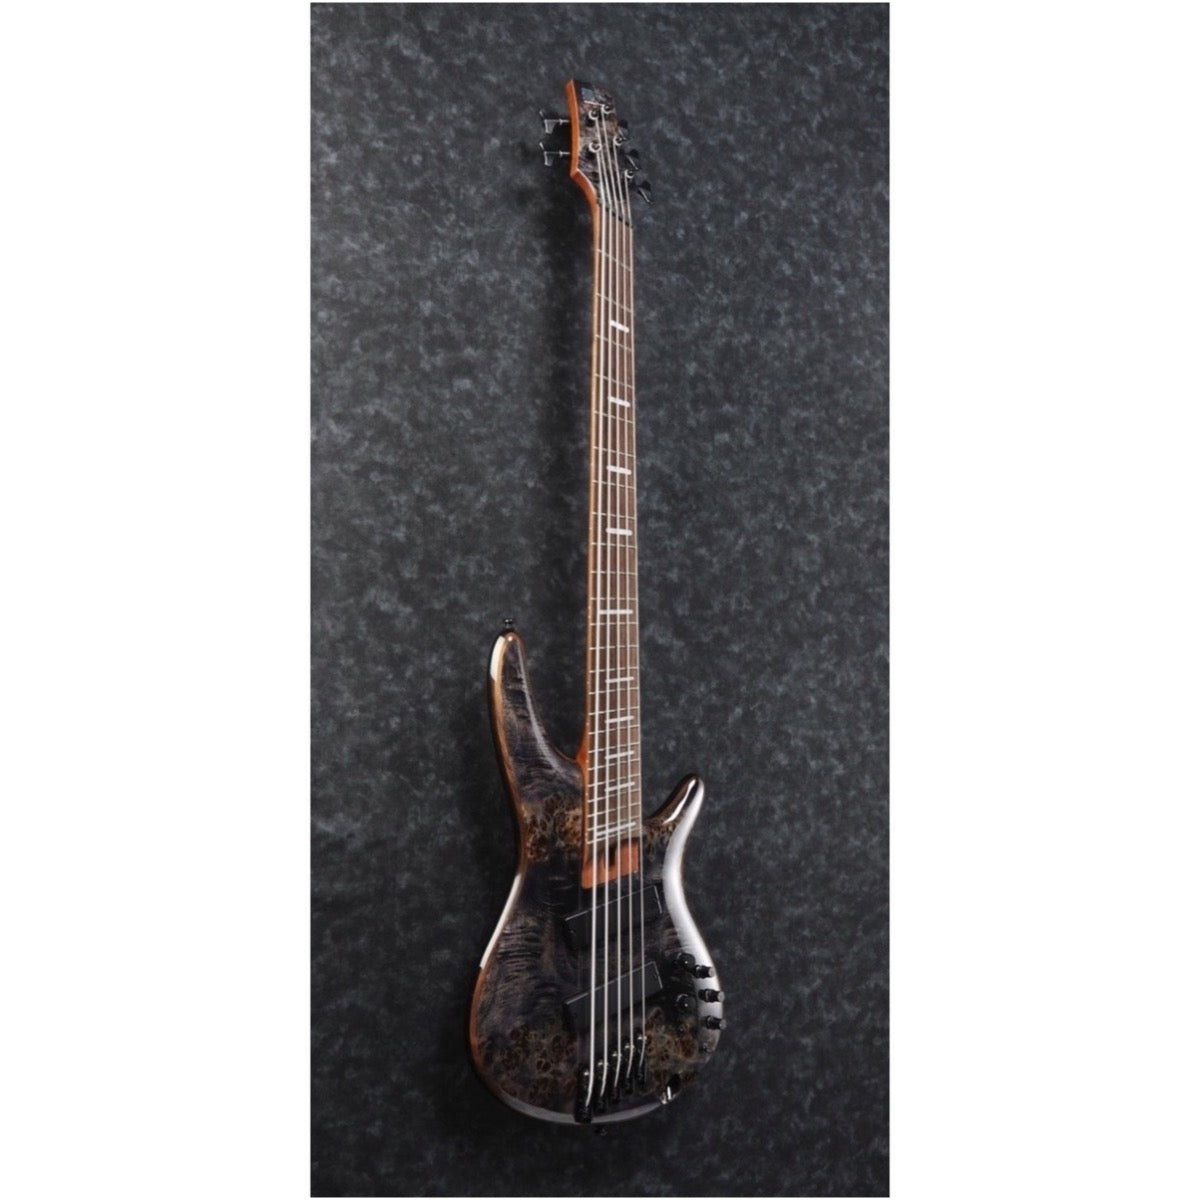 Ibanez SRMS805 Bass Workshop Multi-Scale Electric Bass, 5-String, Deep Twilight